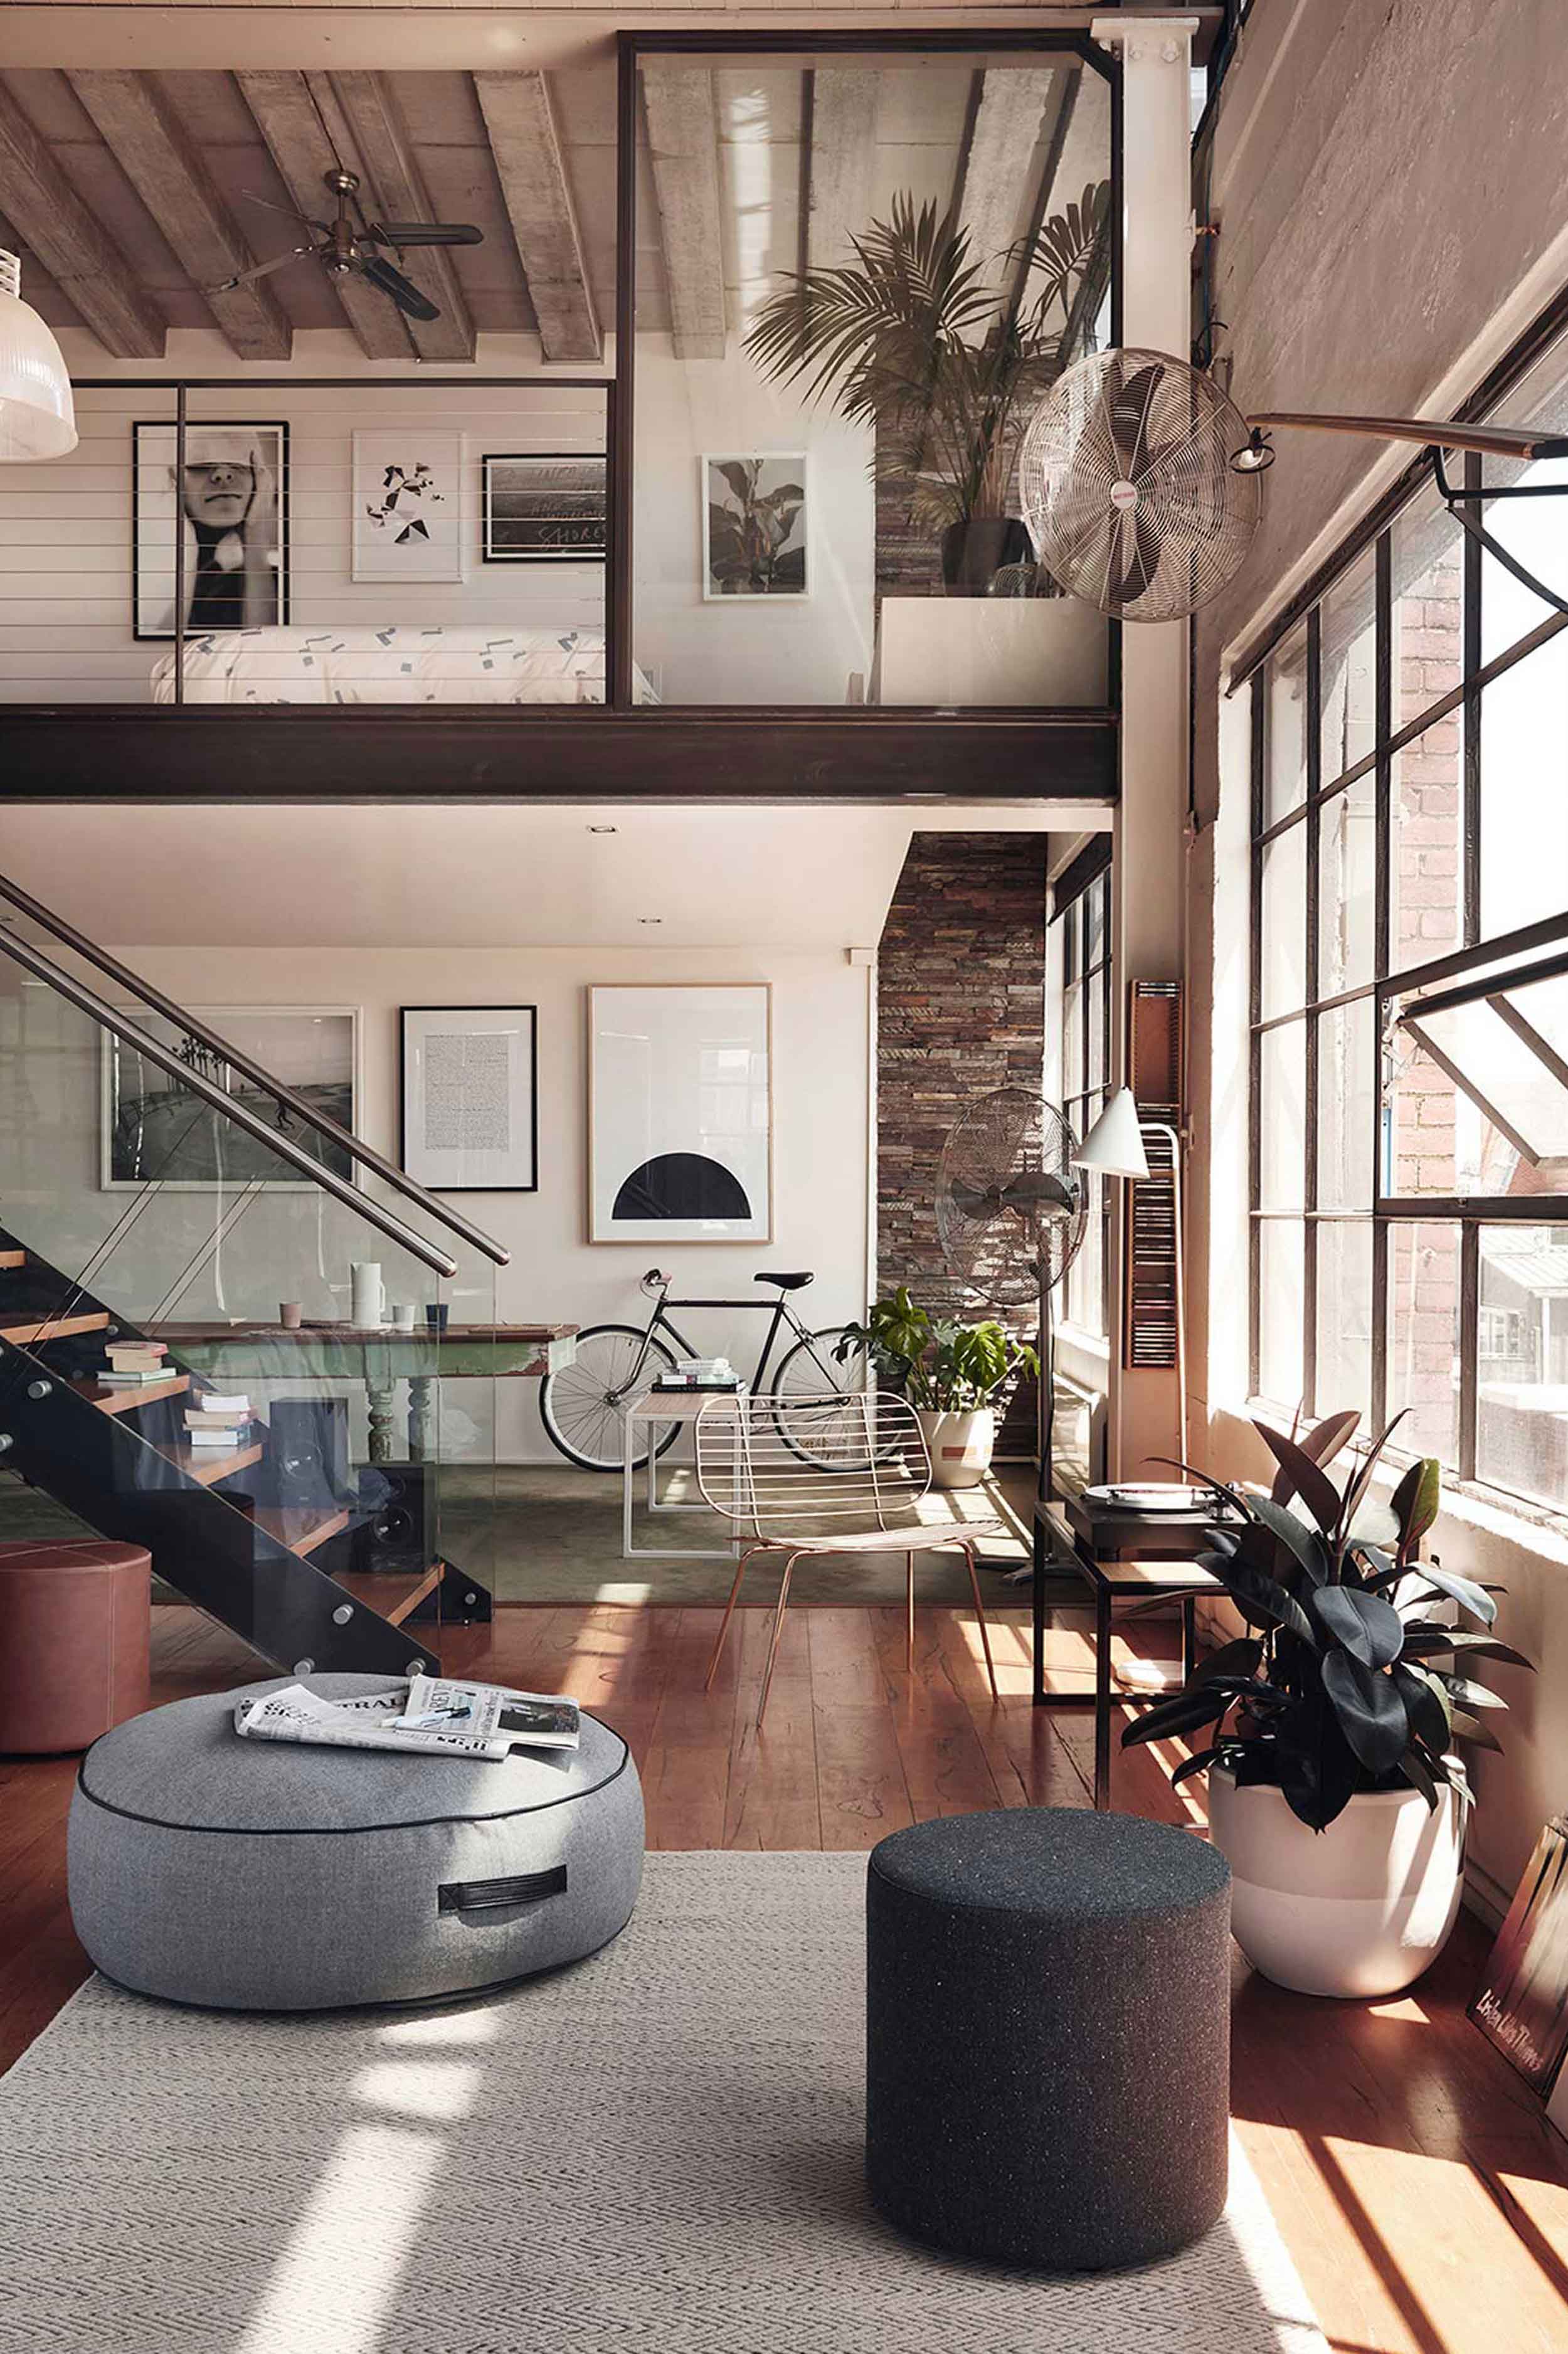 If You Have Been Dreaming About New York Industrial Lofts, We Got You 4